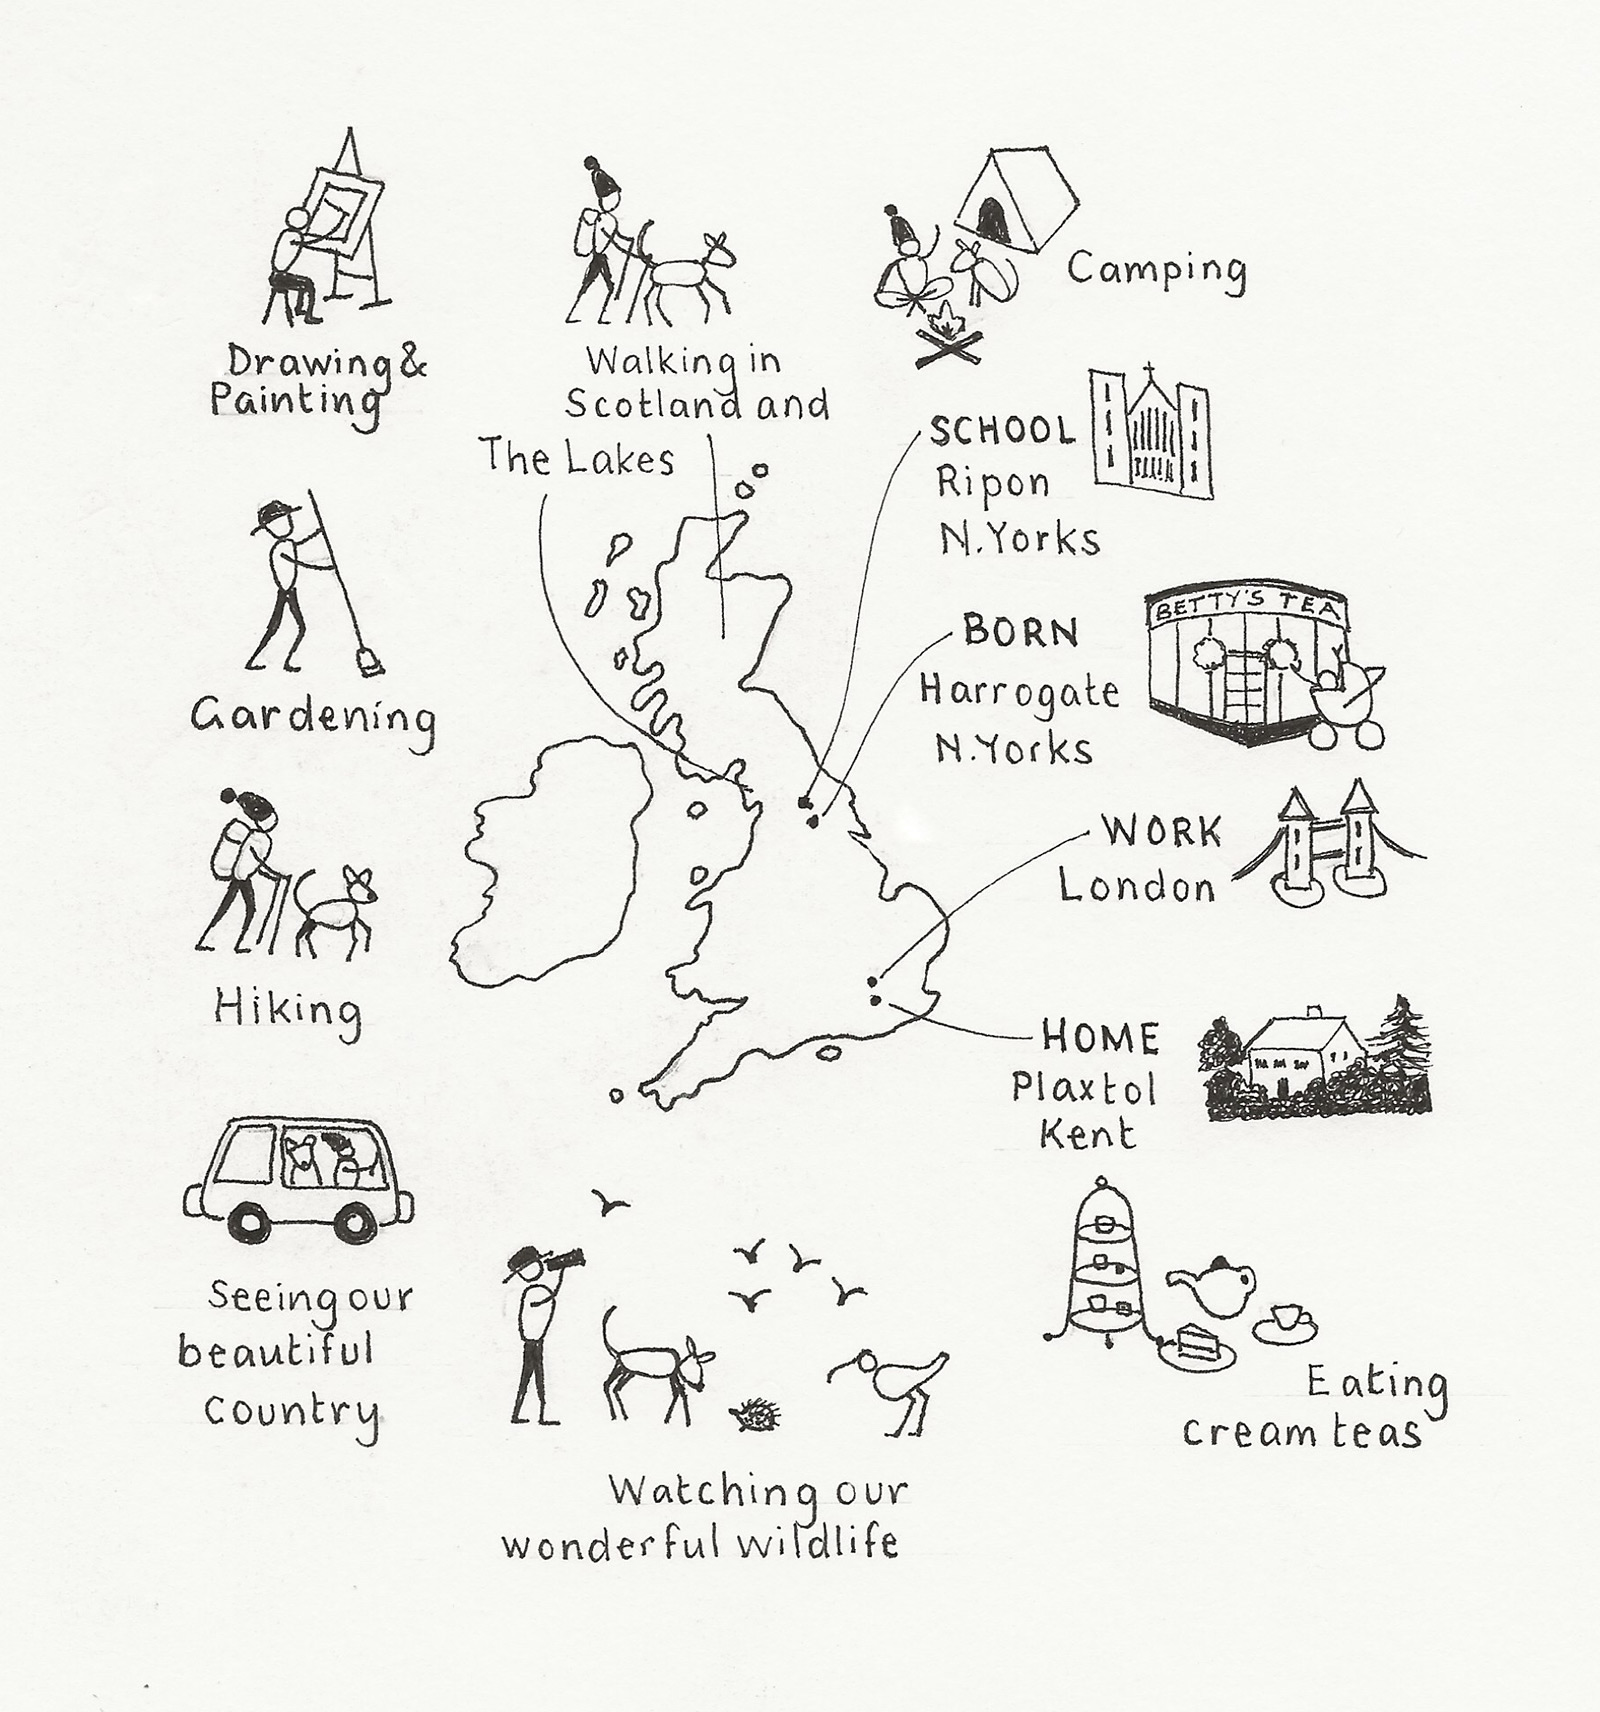 Map of the UK showing Camilla's interests